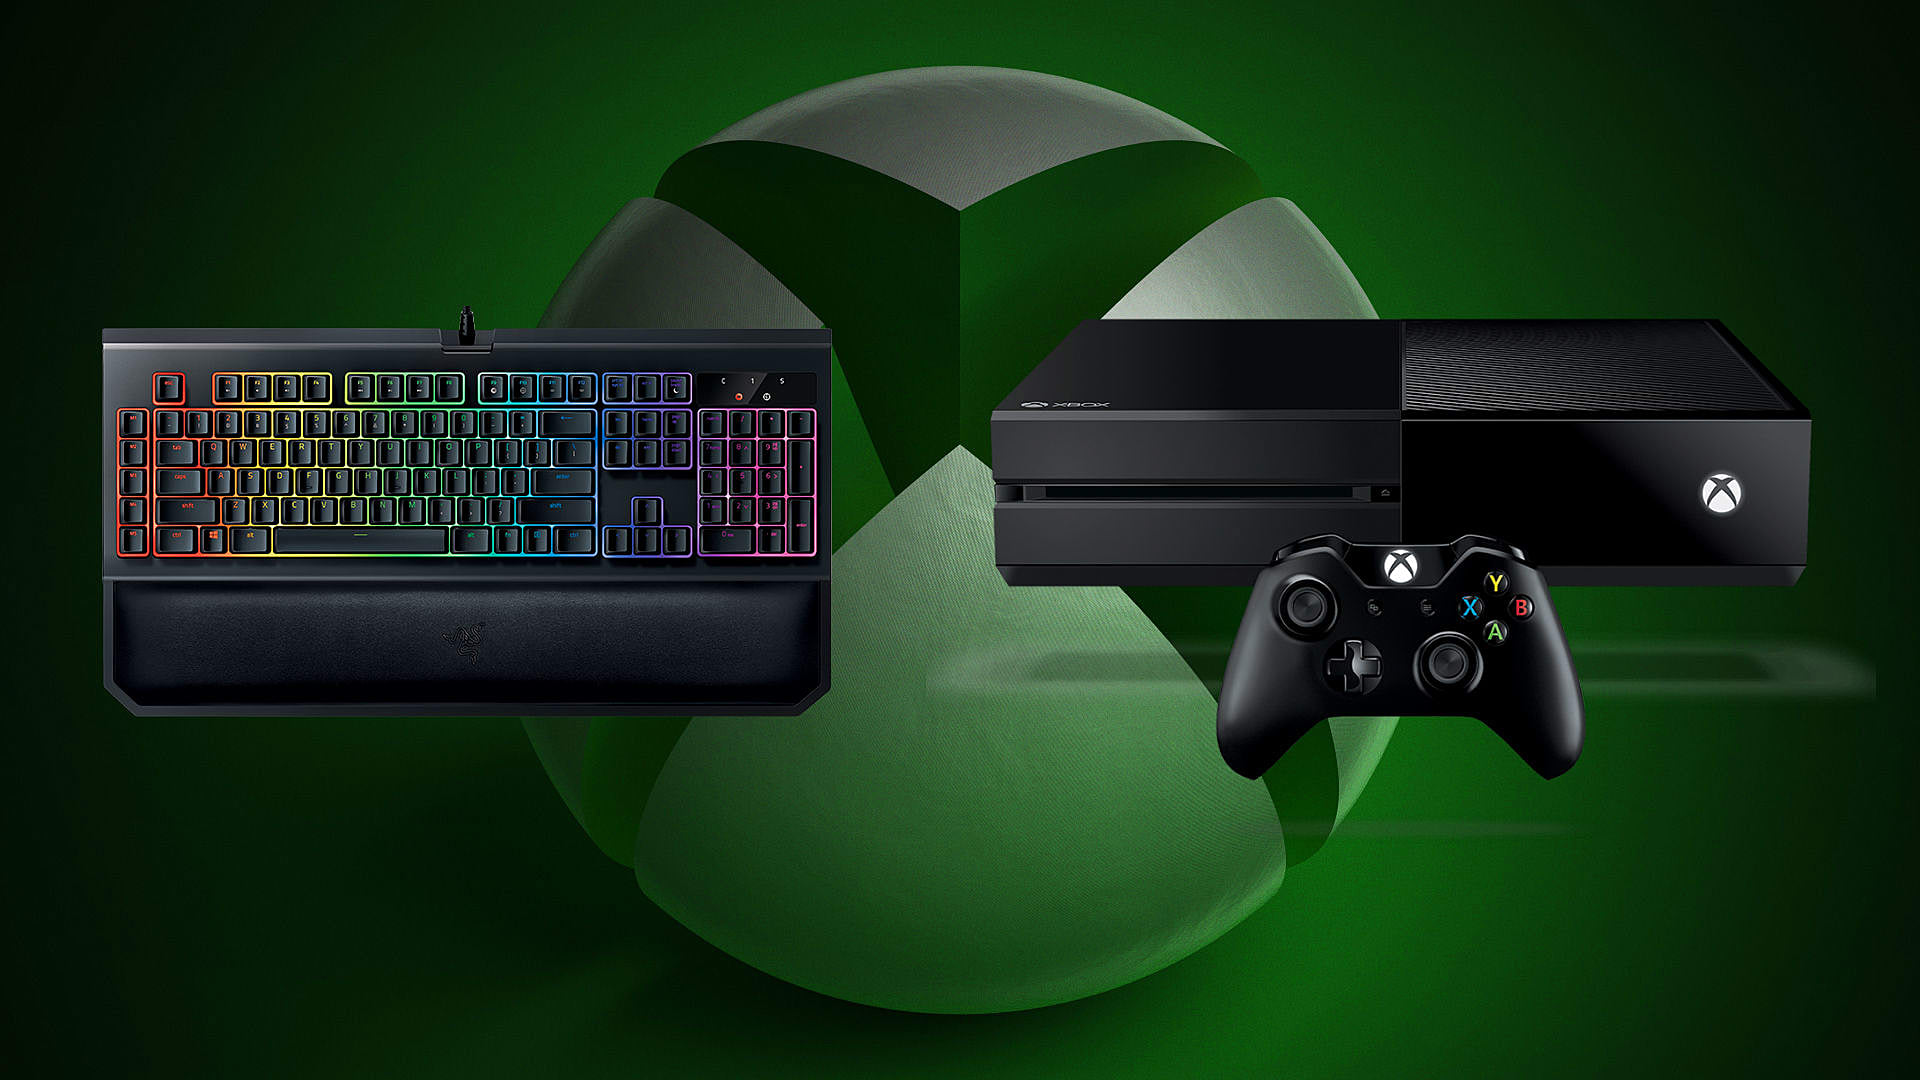 xbox one games with mouse support